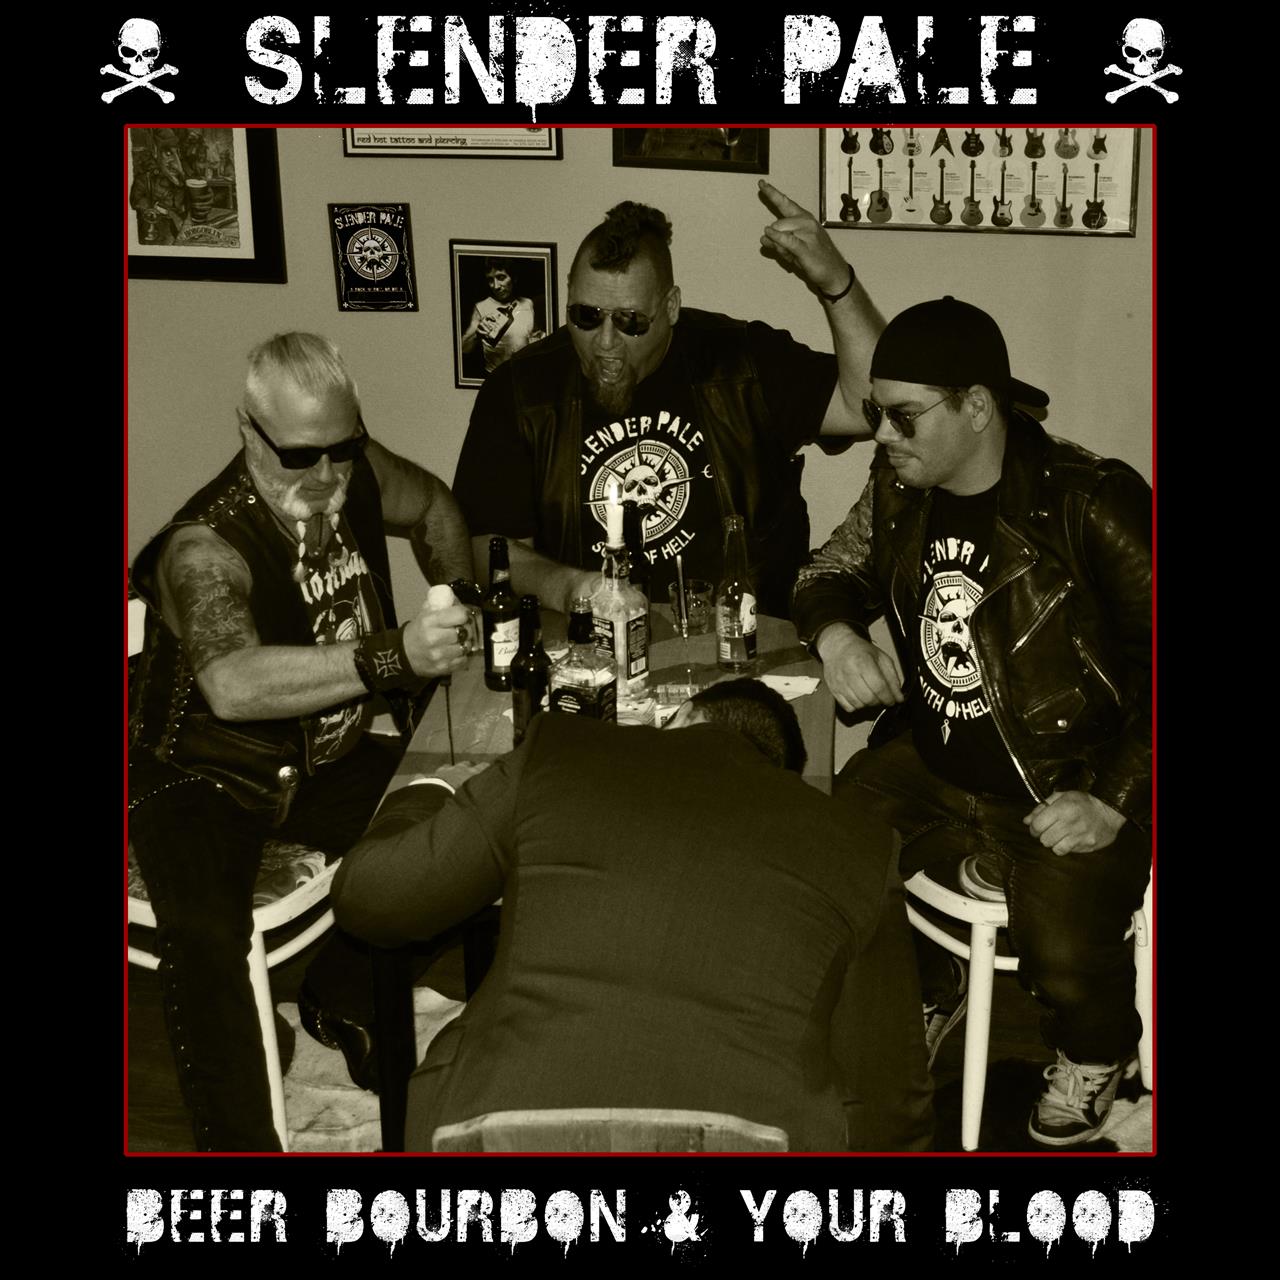 Beer, Bourbon & Your Blood - cover art